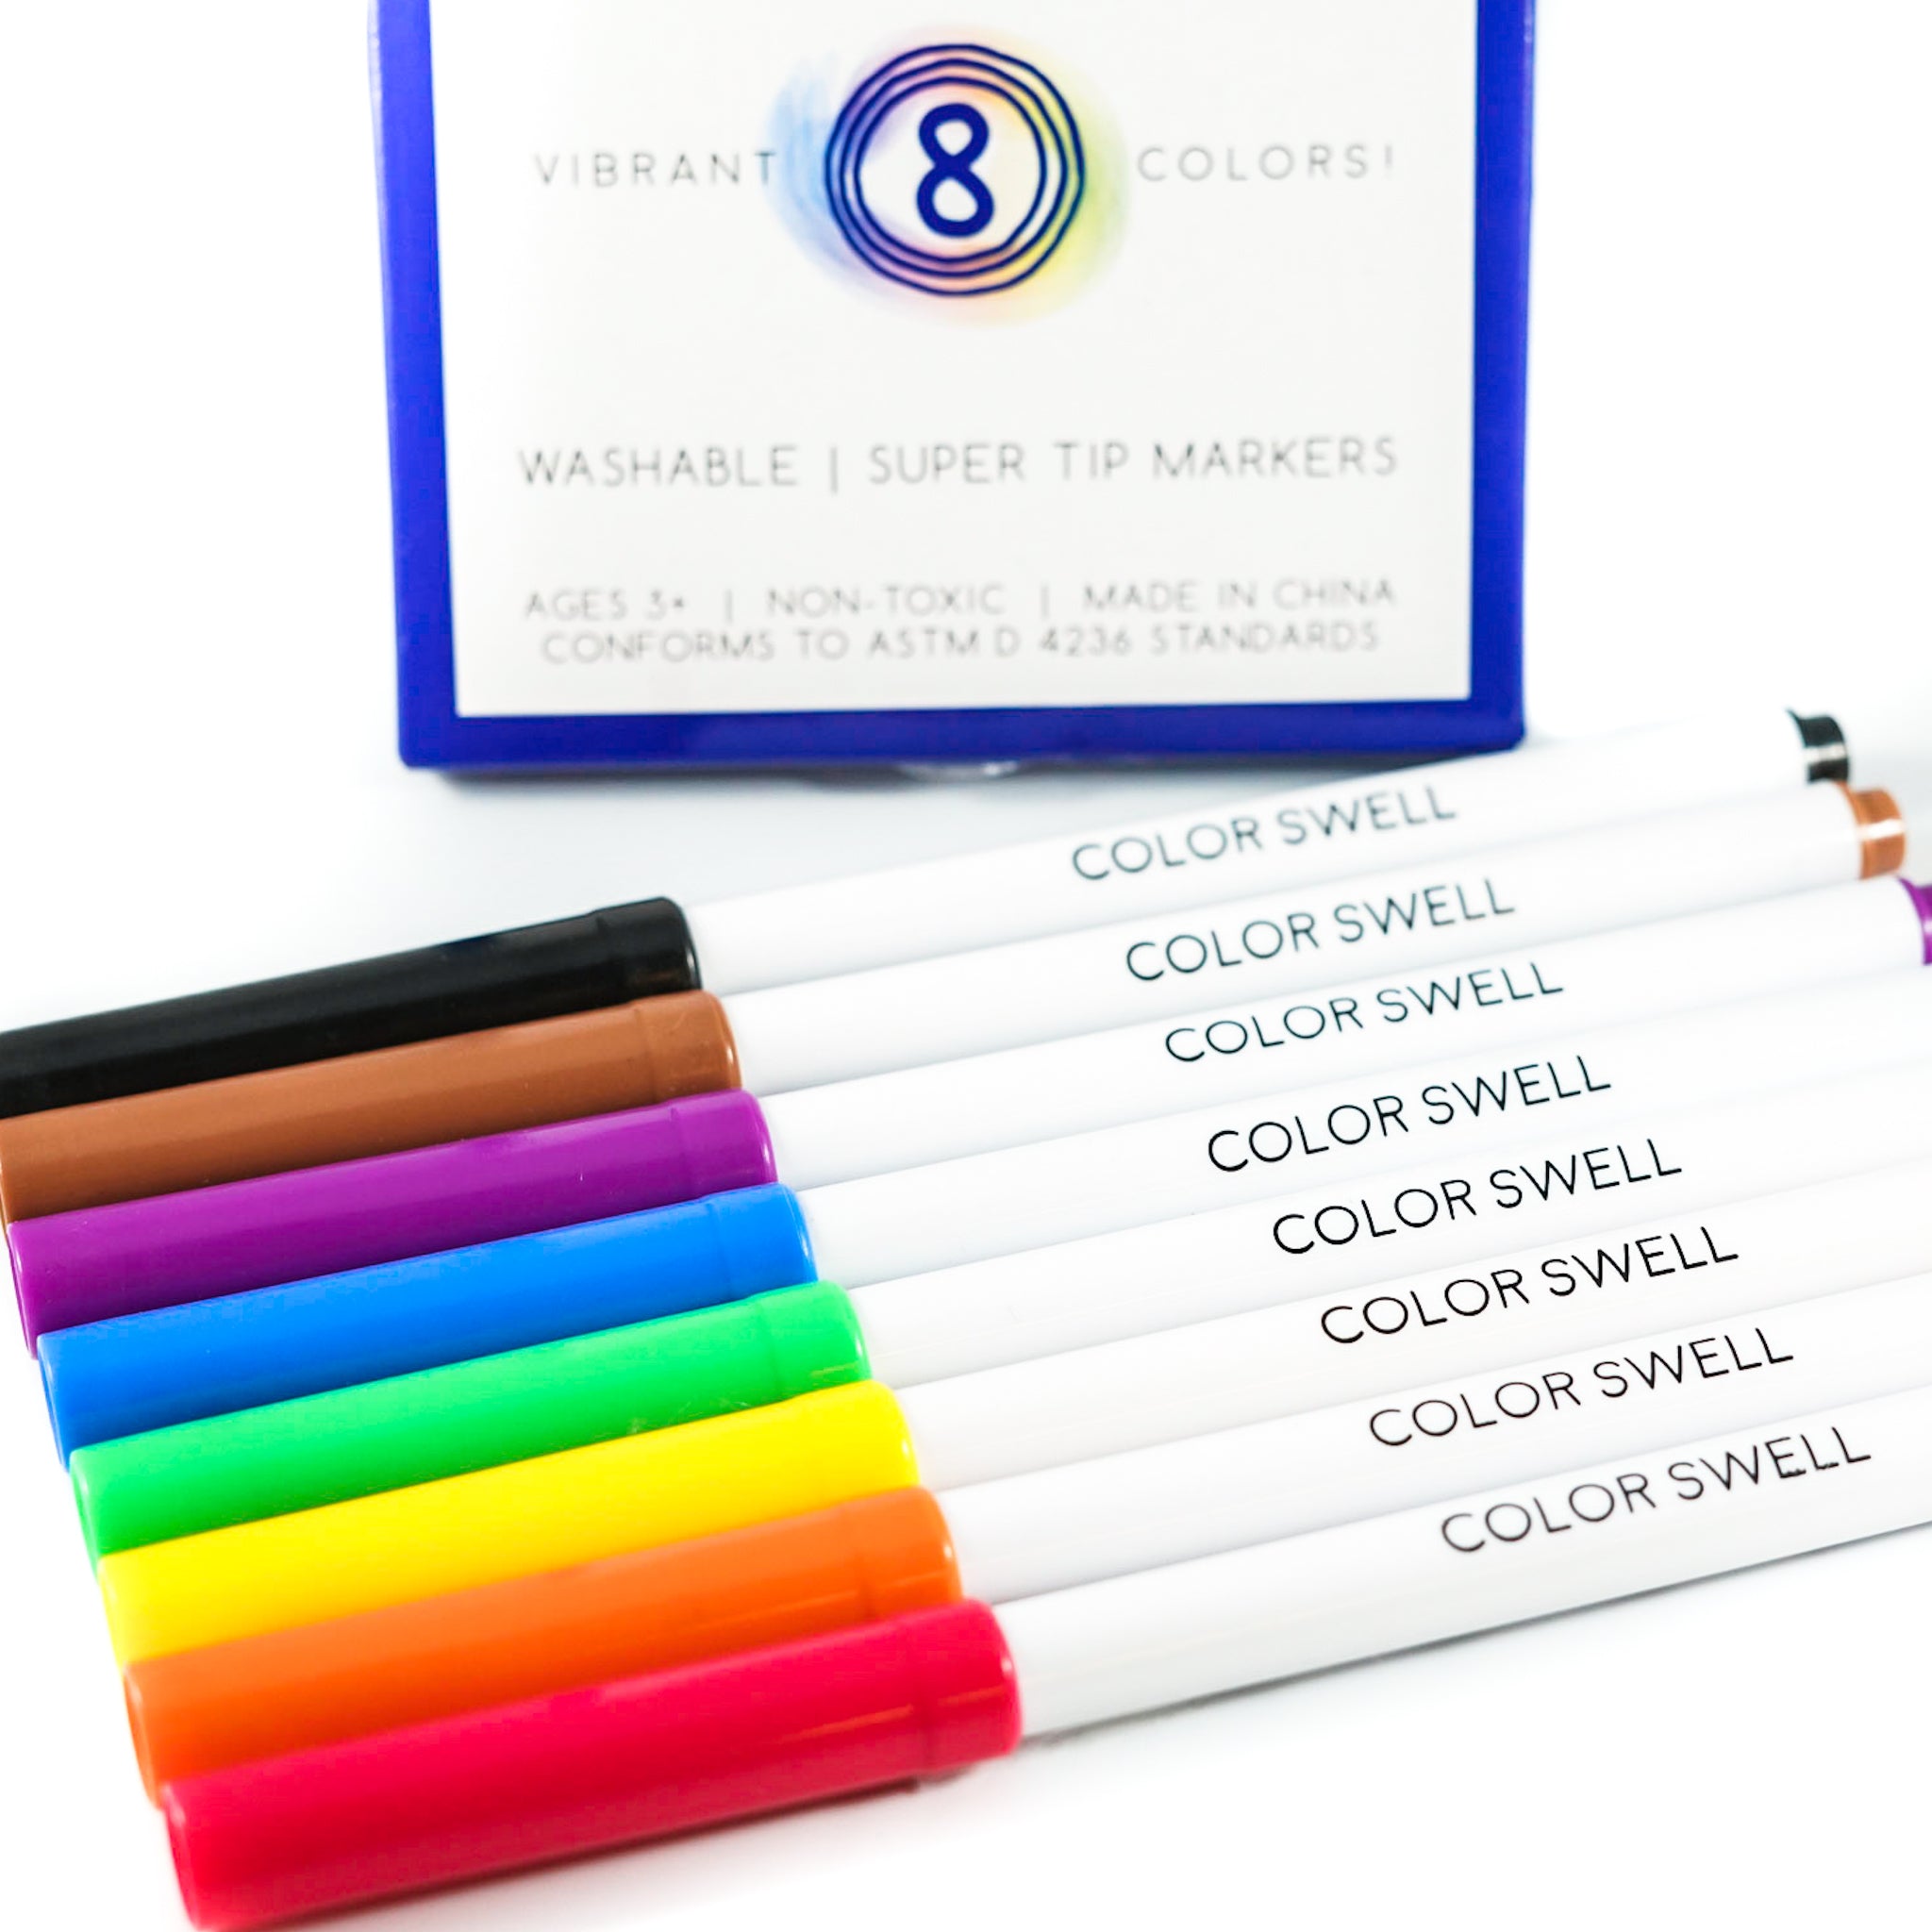 Color Swell Super Tip Washable Marker Pack - 8 Vibrant Colors